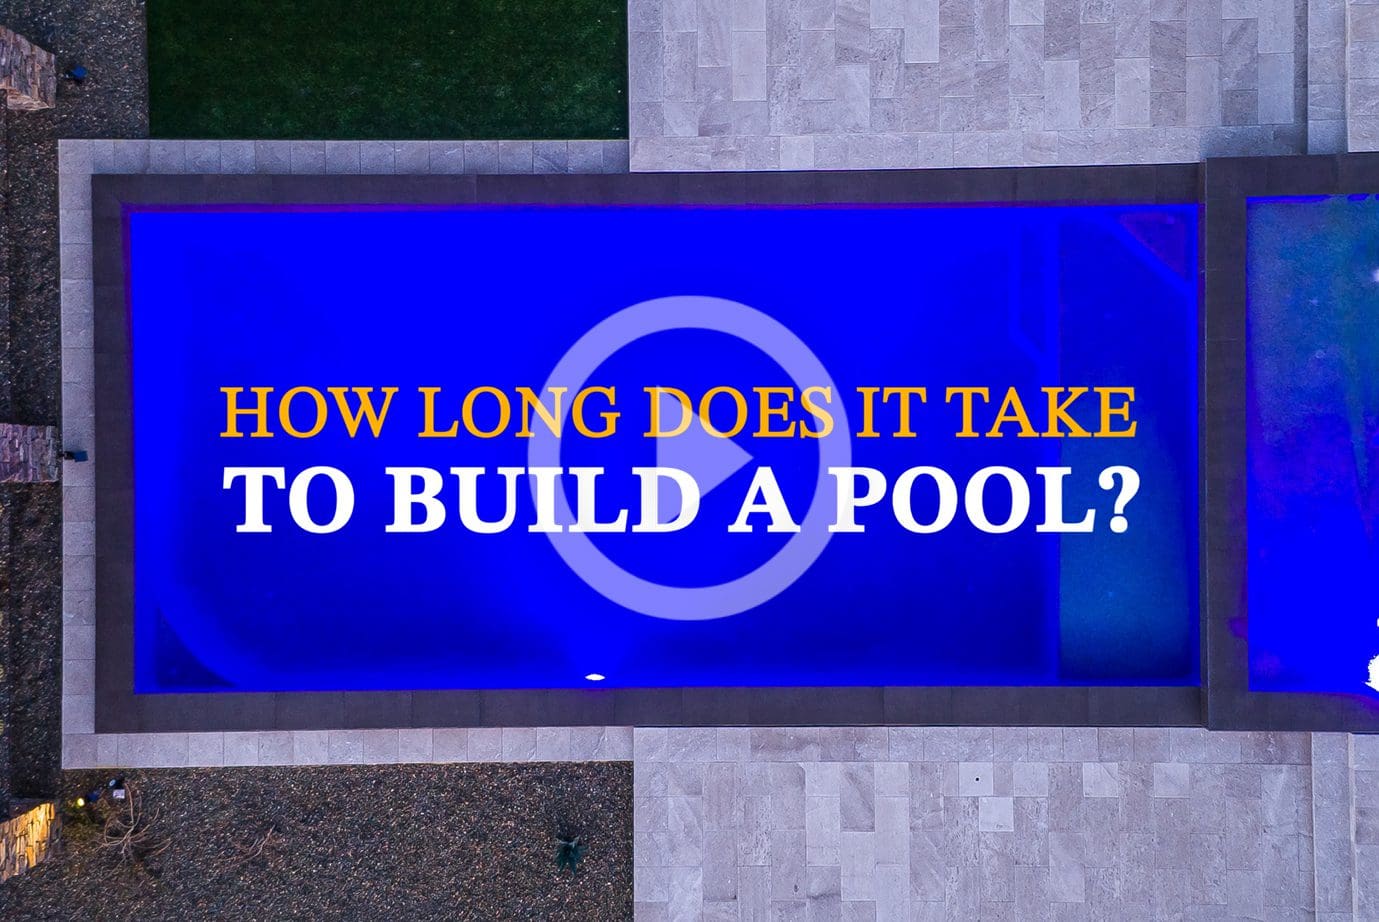 How Long Does it Take to Build a Pool?